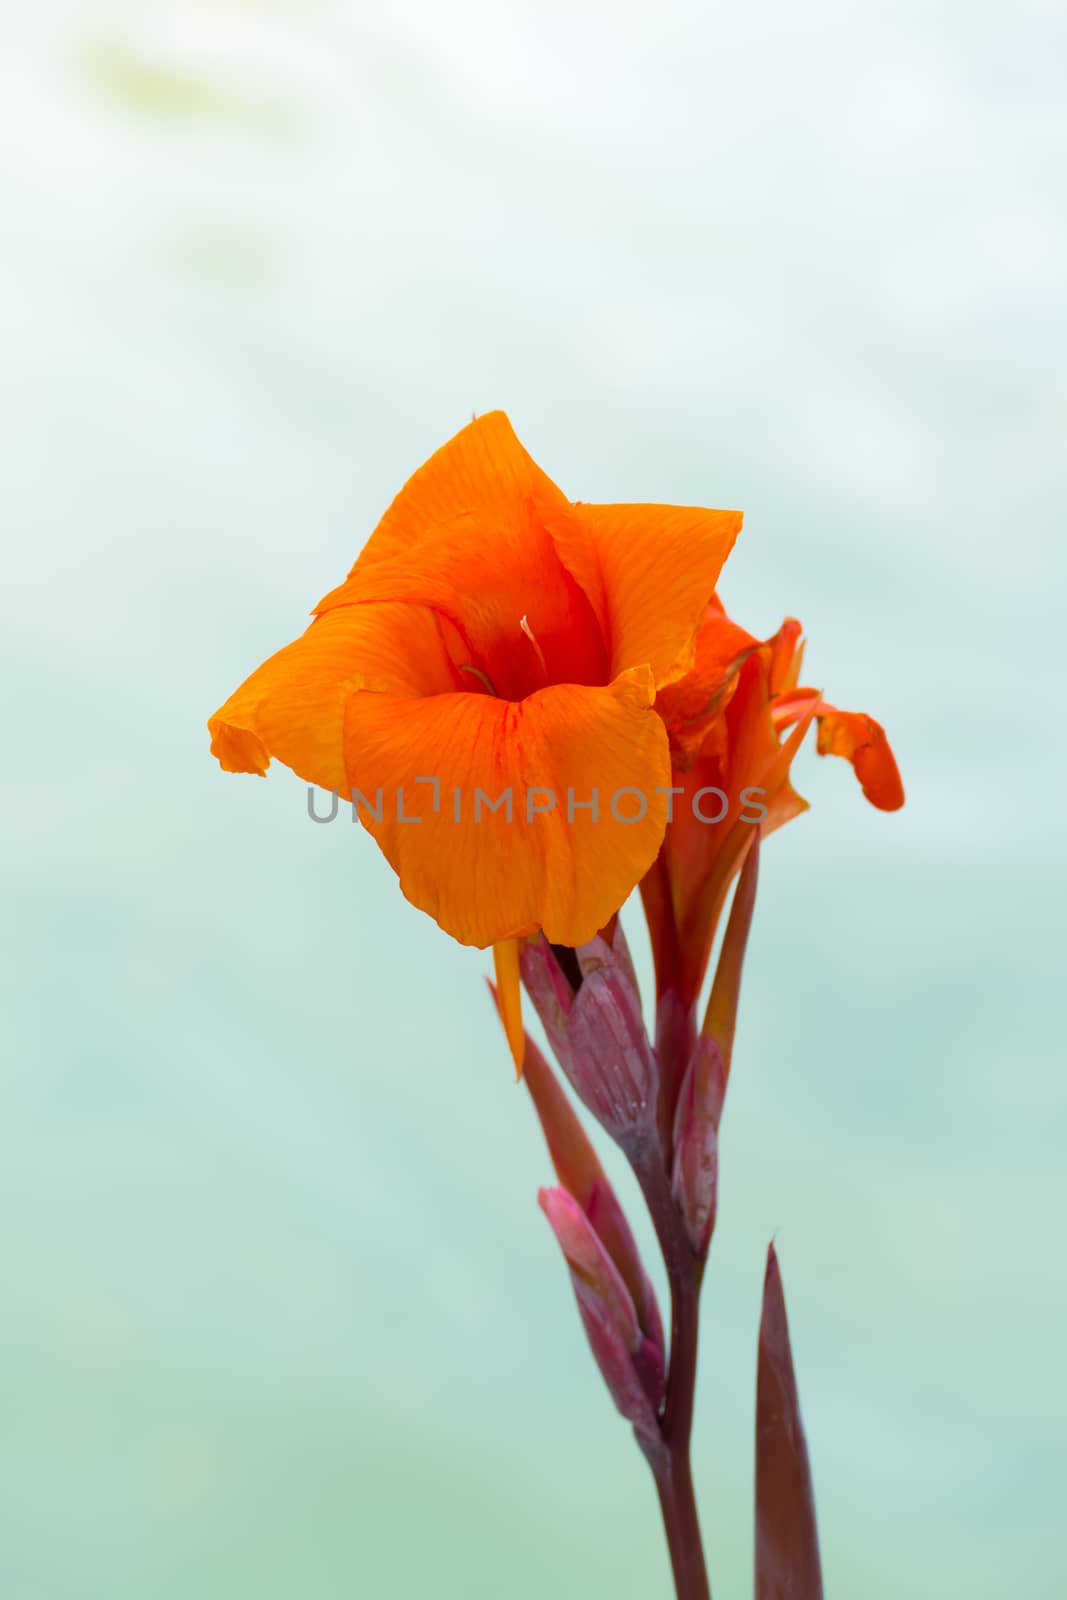 Radiant Canna Lily Blossom on a Summer Day by teerawit